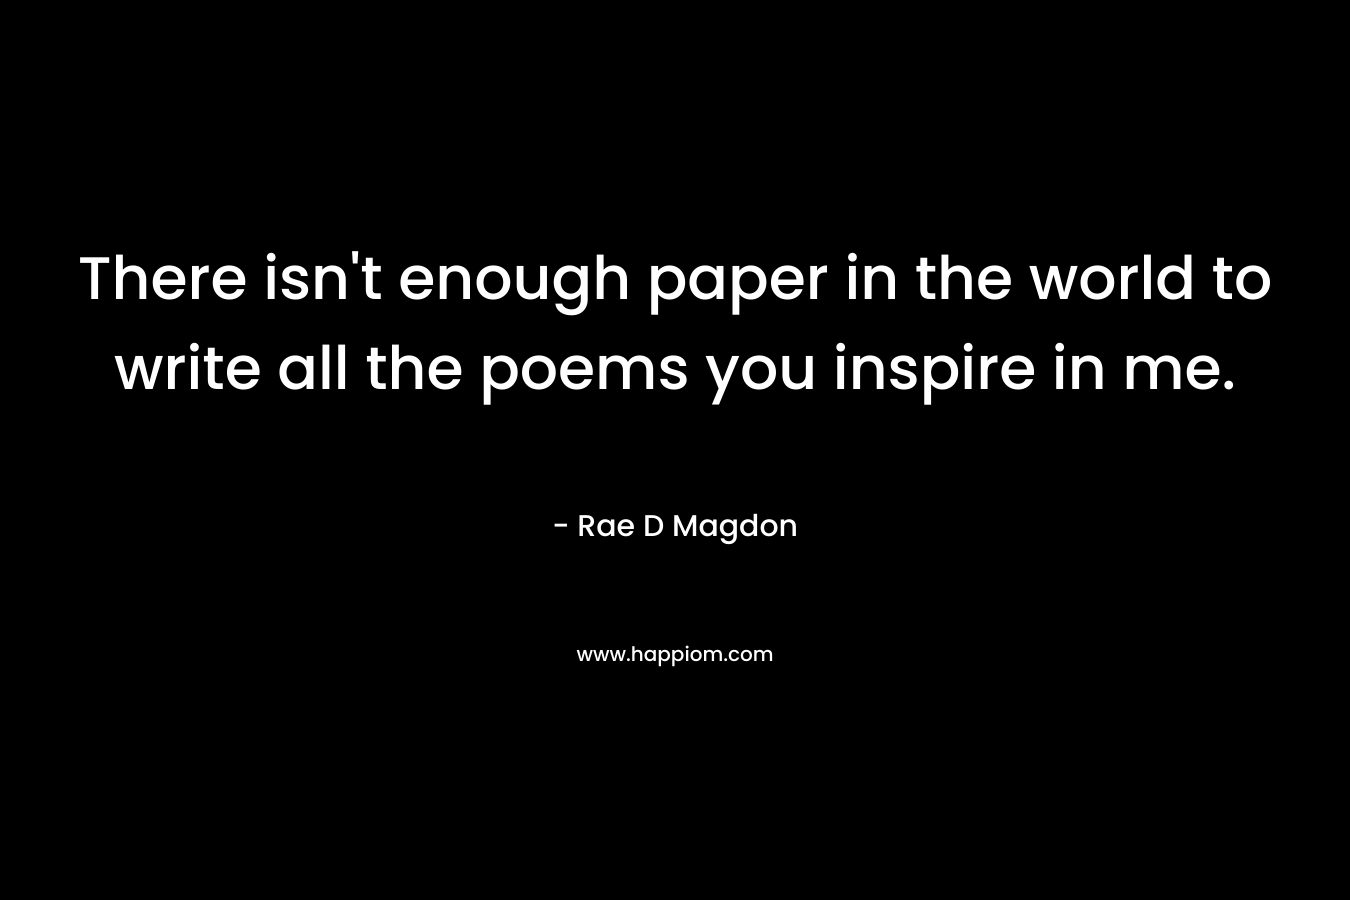 There isn't enough paper in the world to write all the poems you inspire in me.